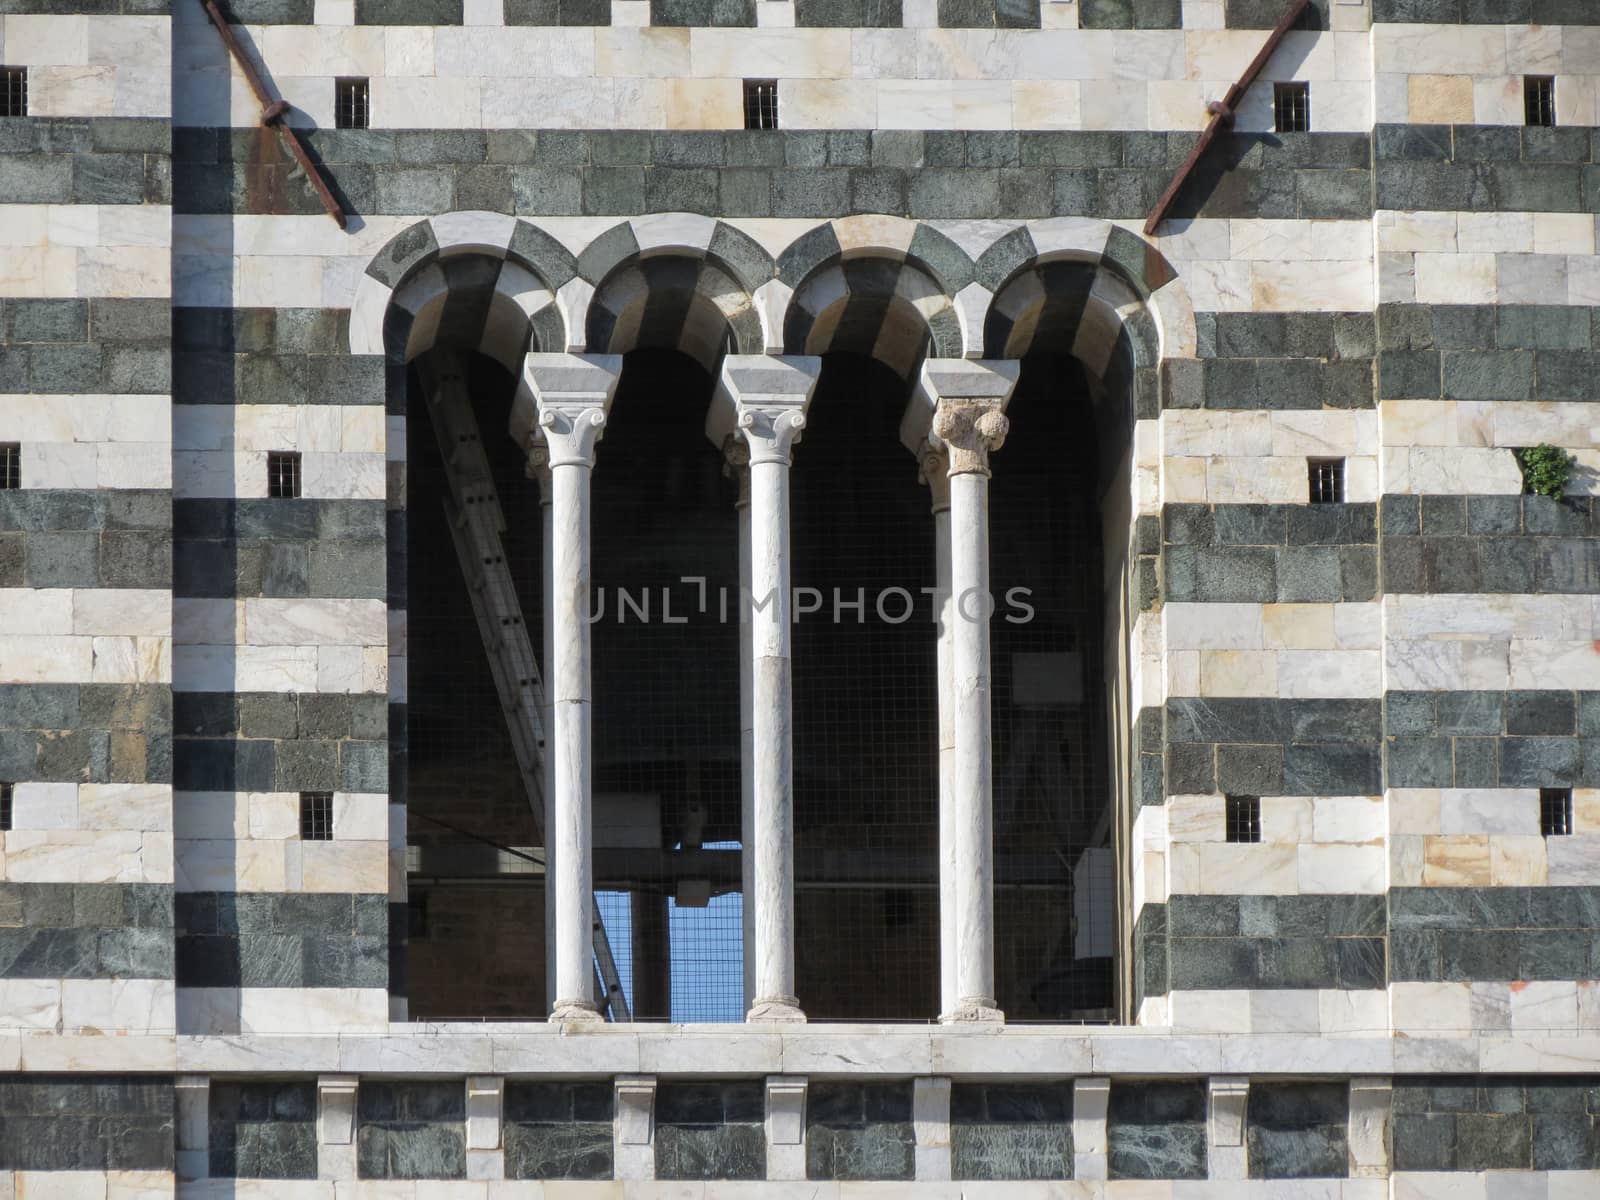 Siena, Cathedral steeple window by paolo77